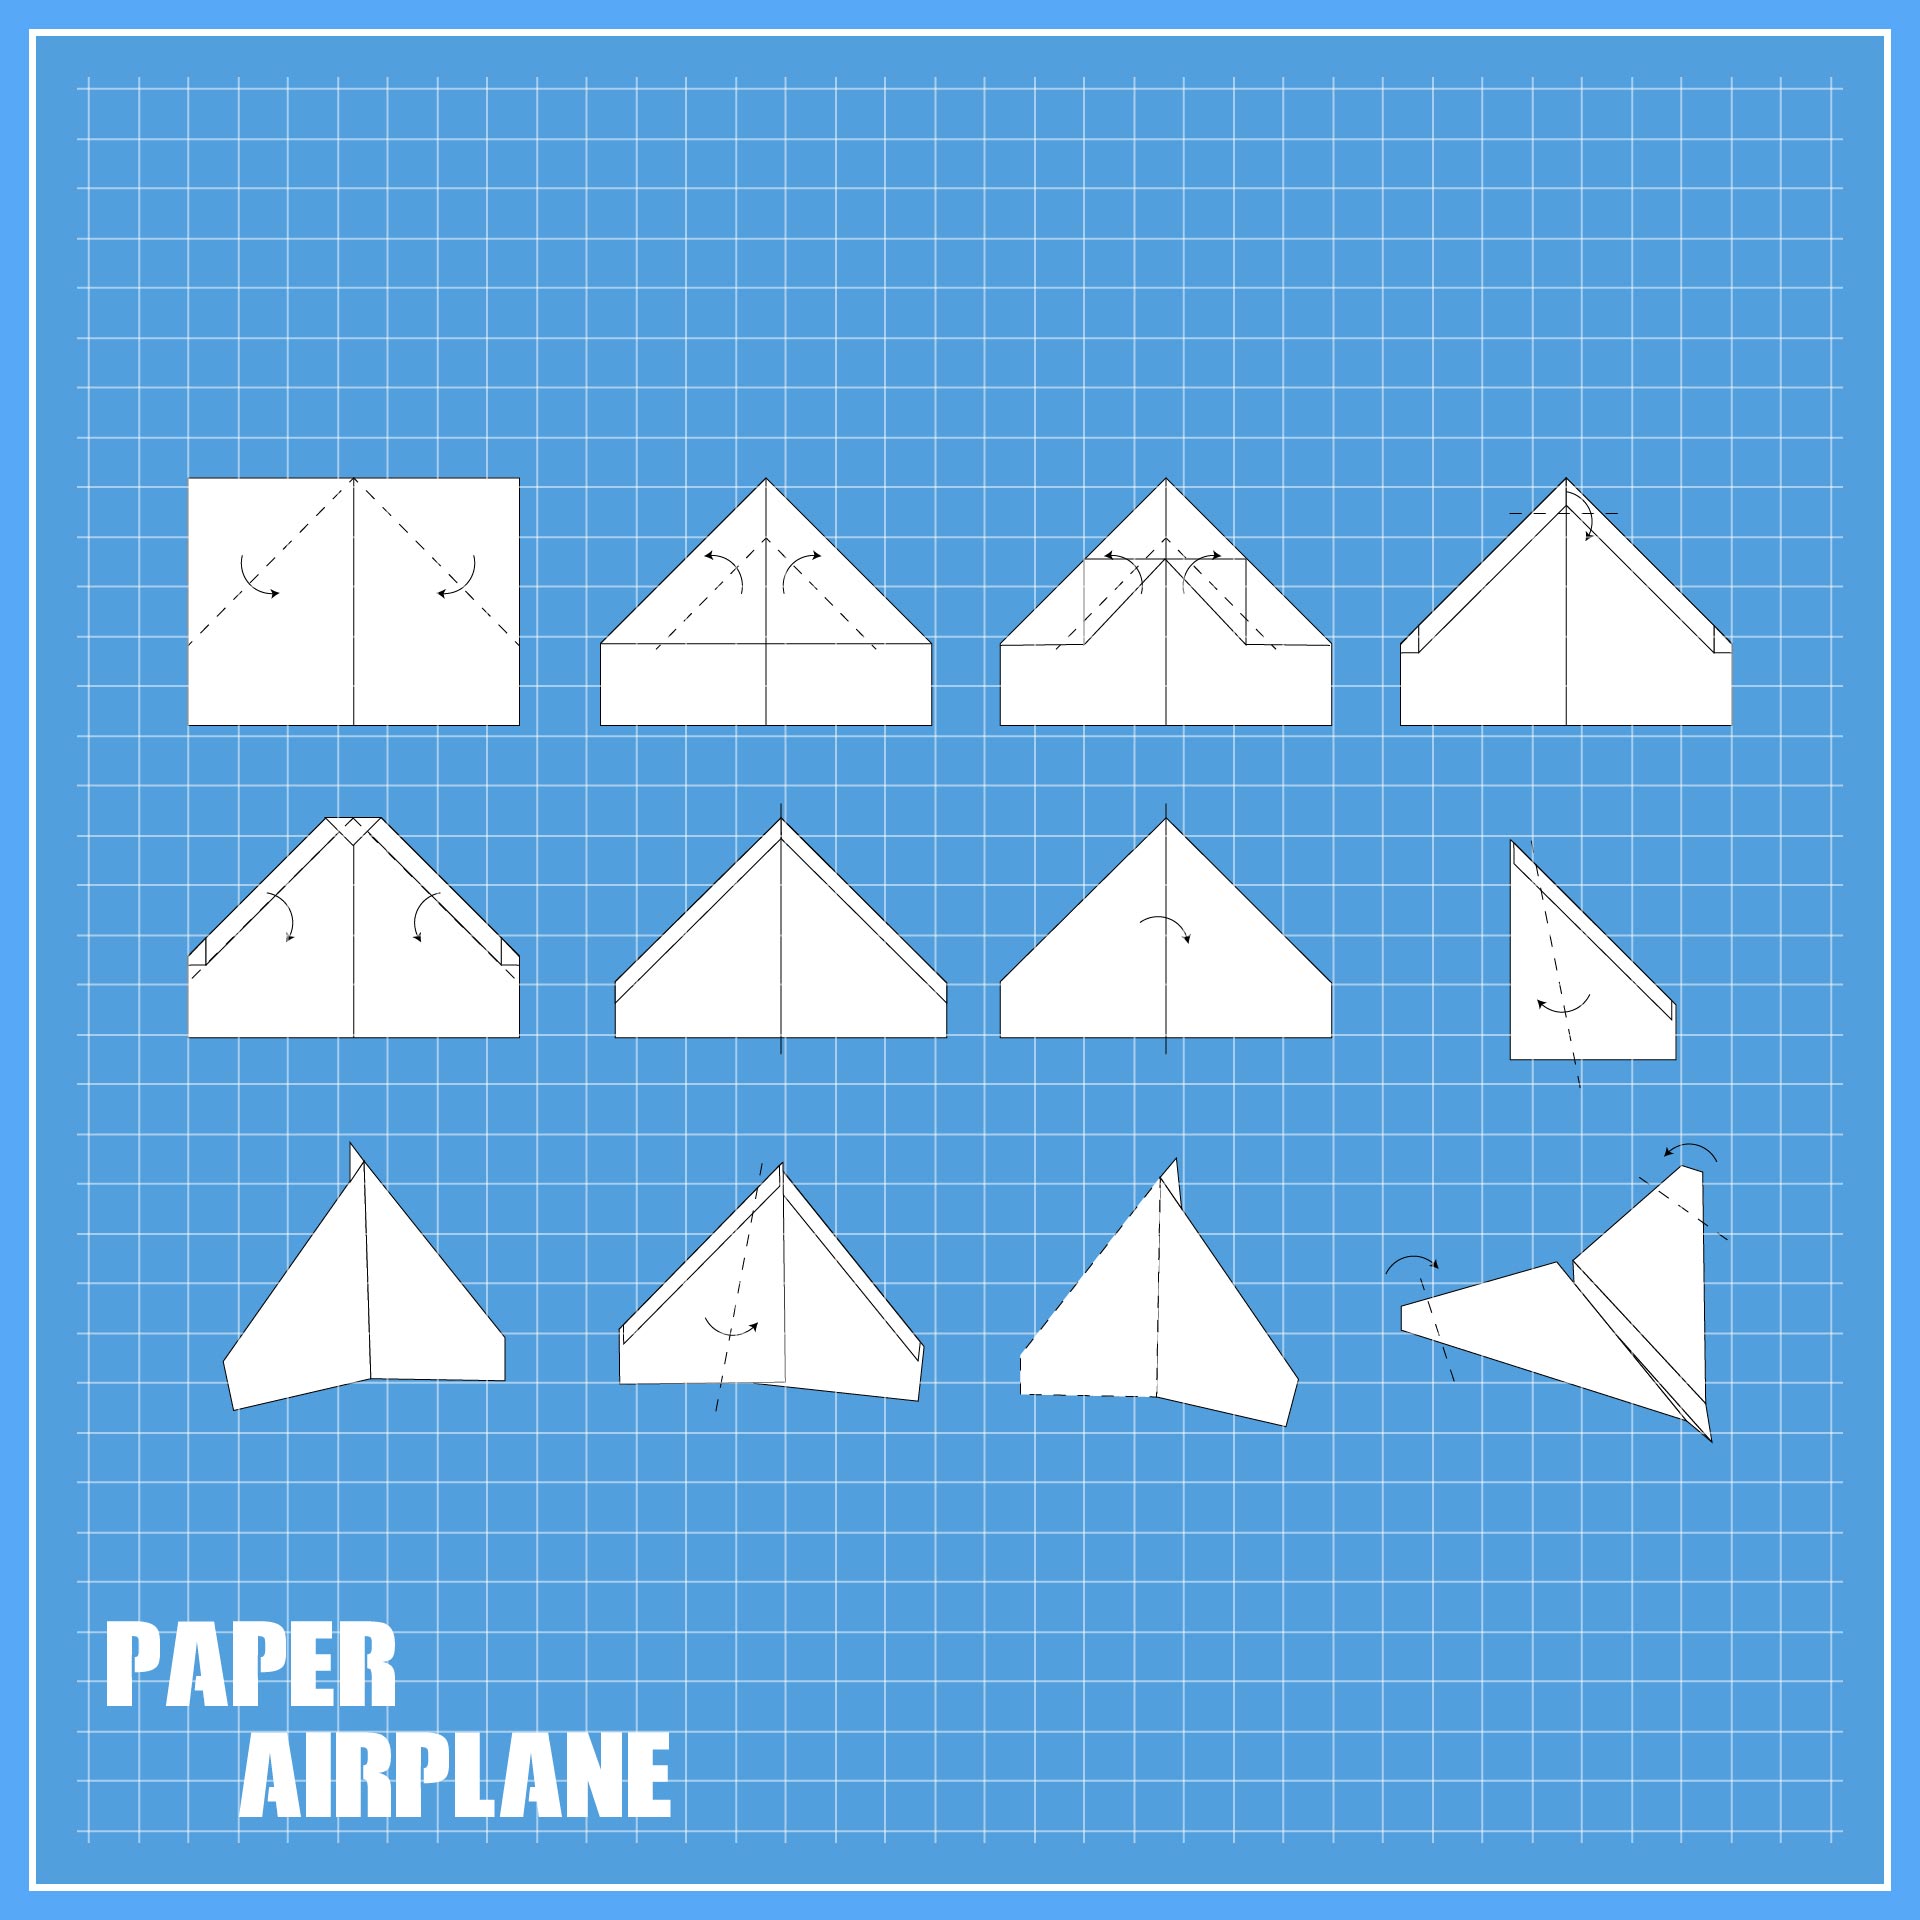 6 Best Images Of Printable Paper Airplane Templates Printable Paper Plane Templates Paper 